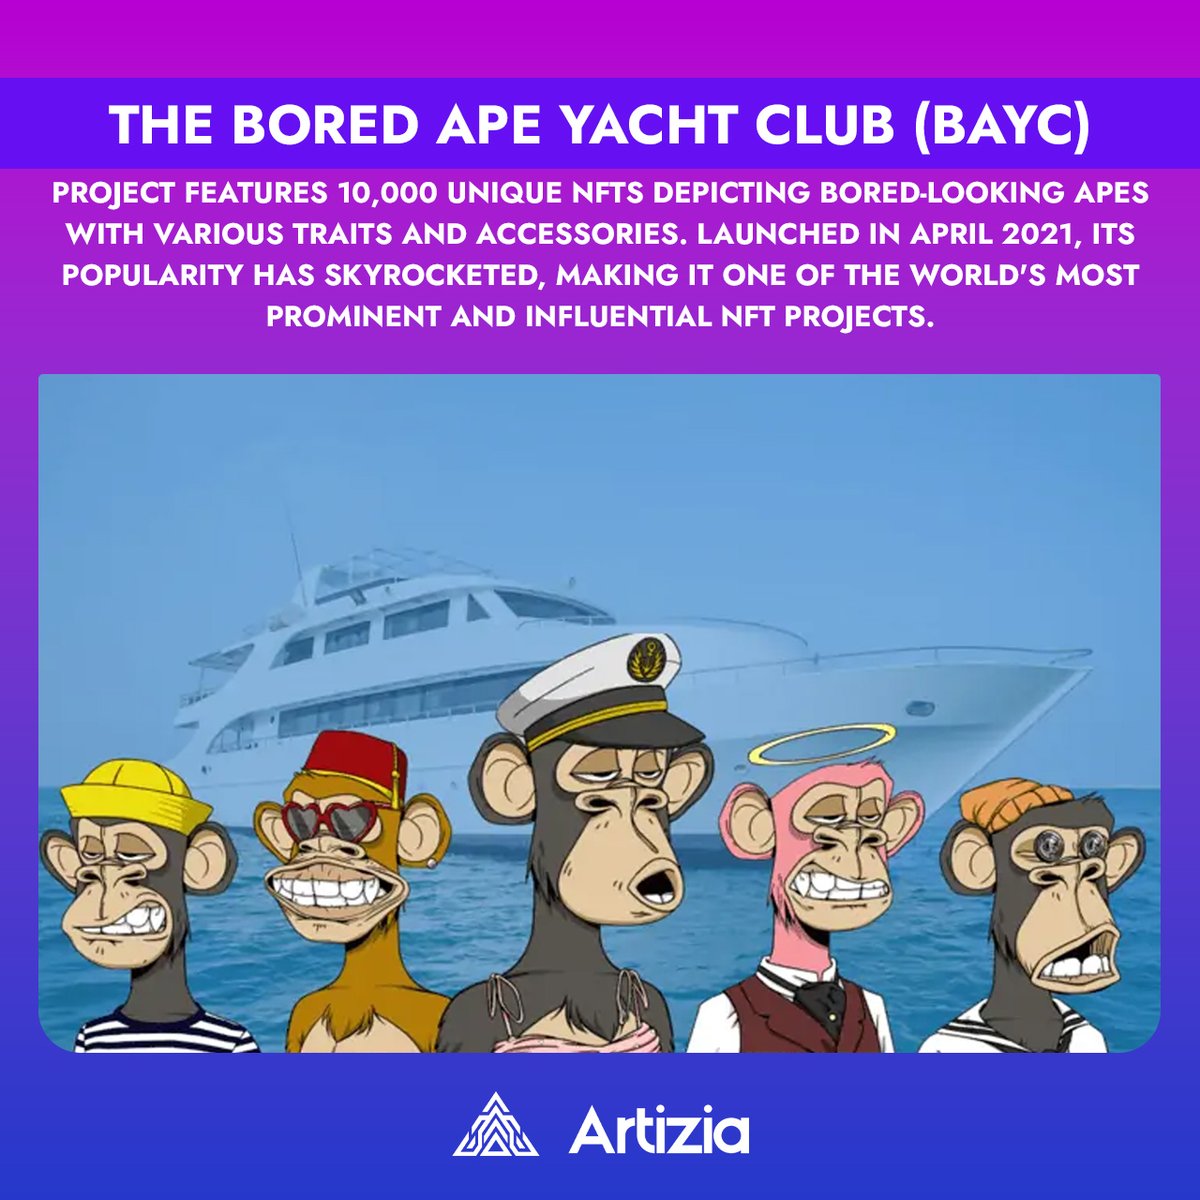 Catch the wave of BAYC! 🌊🐒 From unique traits to a renowned reputation, these 10k NFTs have been a force in the crypto seas since April '21. 🐵⛵️
.
.
.
#NFTCommunity #DigitalArt #CryptoCollectible #BoredApeYachtClub #NFTdrop #VirtualArt #Ethereum #BlockchainArt #CryptoArt #BAYC